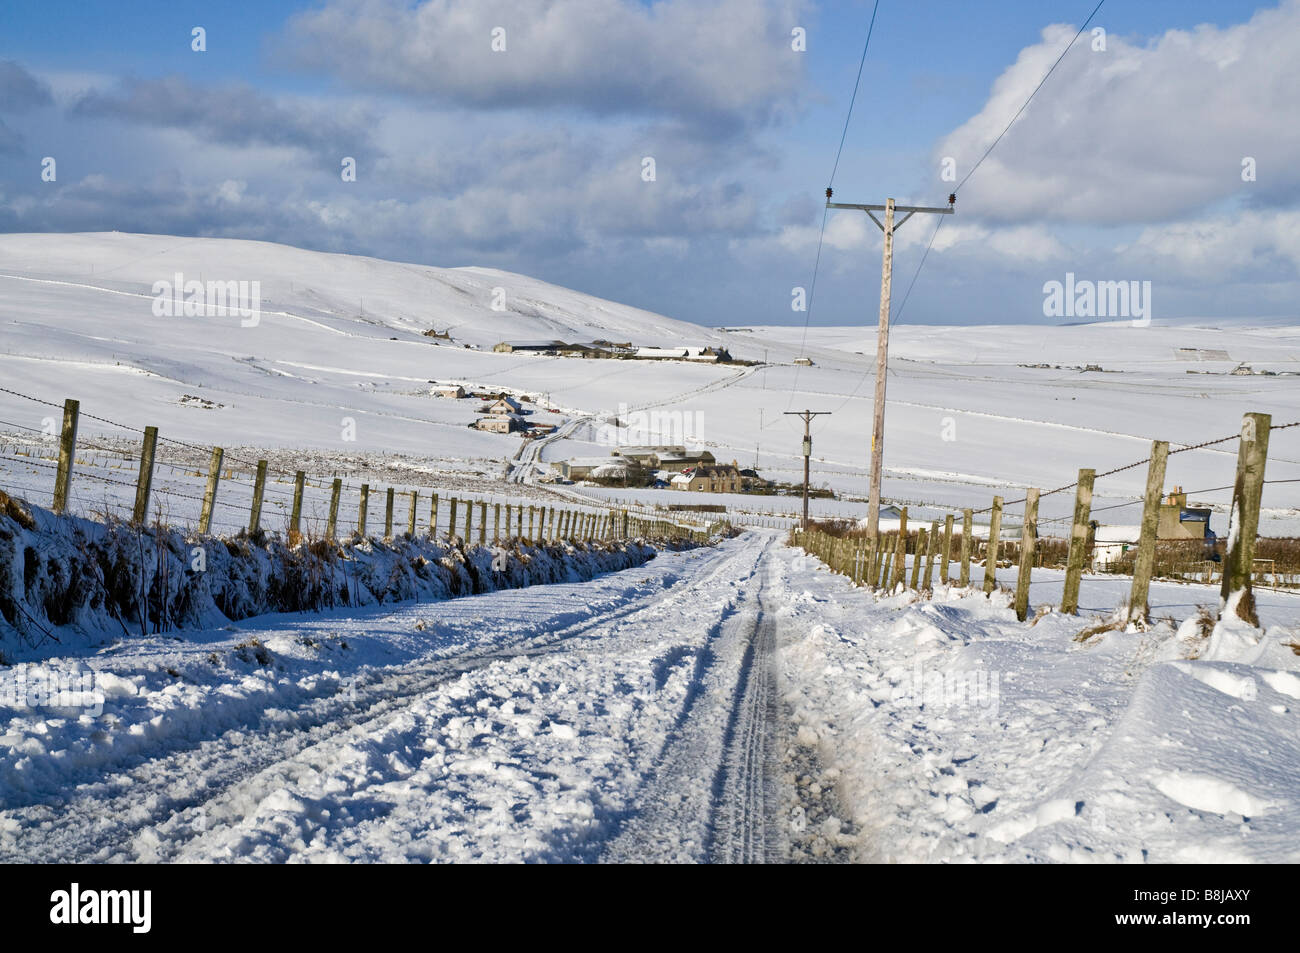 dh  ROADS UK Icy snowy road snow fields farmhouses hydro electric poles Orkney countrylane wintertime lane winter country Scotland rural Stock Photo